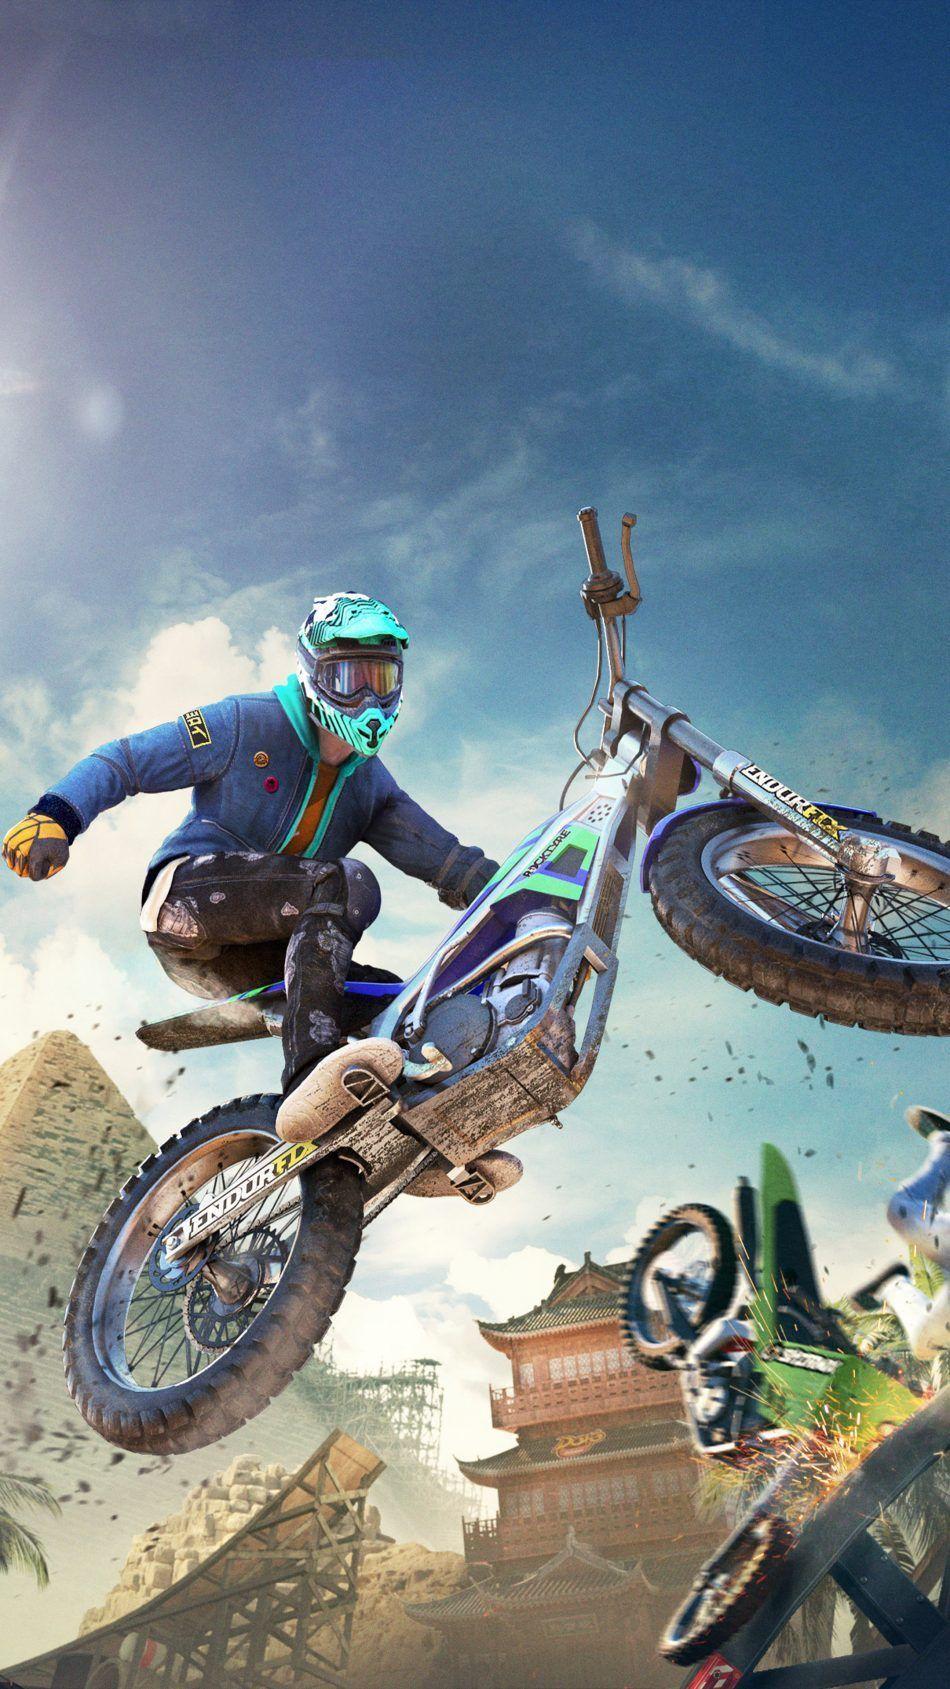 Trials Rising Video Game. Video Game Wallpaper. Xbox, Xbox one, Games